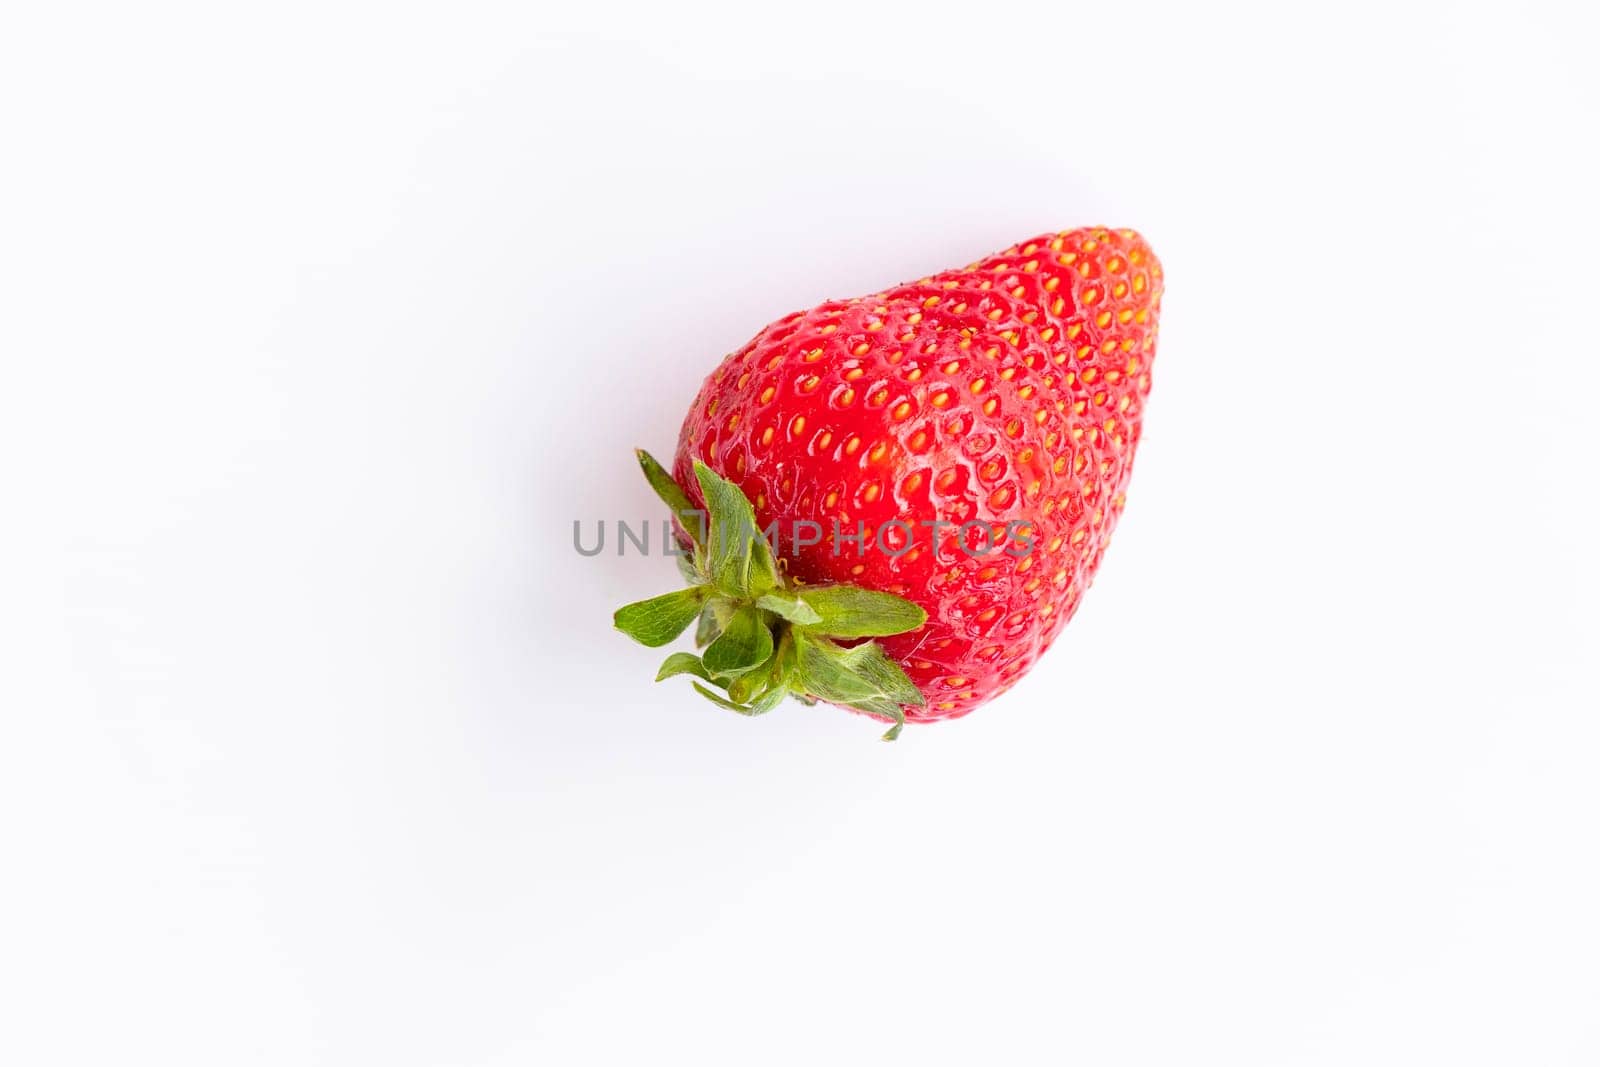 top view of red, ripe, juicy strawberries on a white background. isolate.